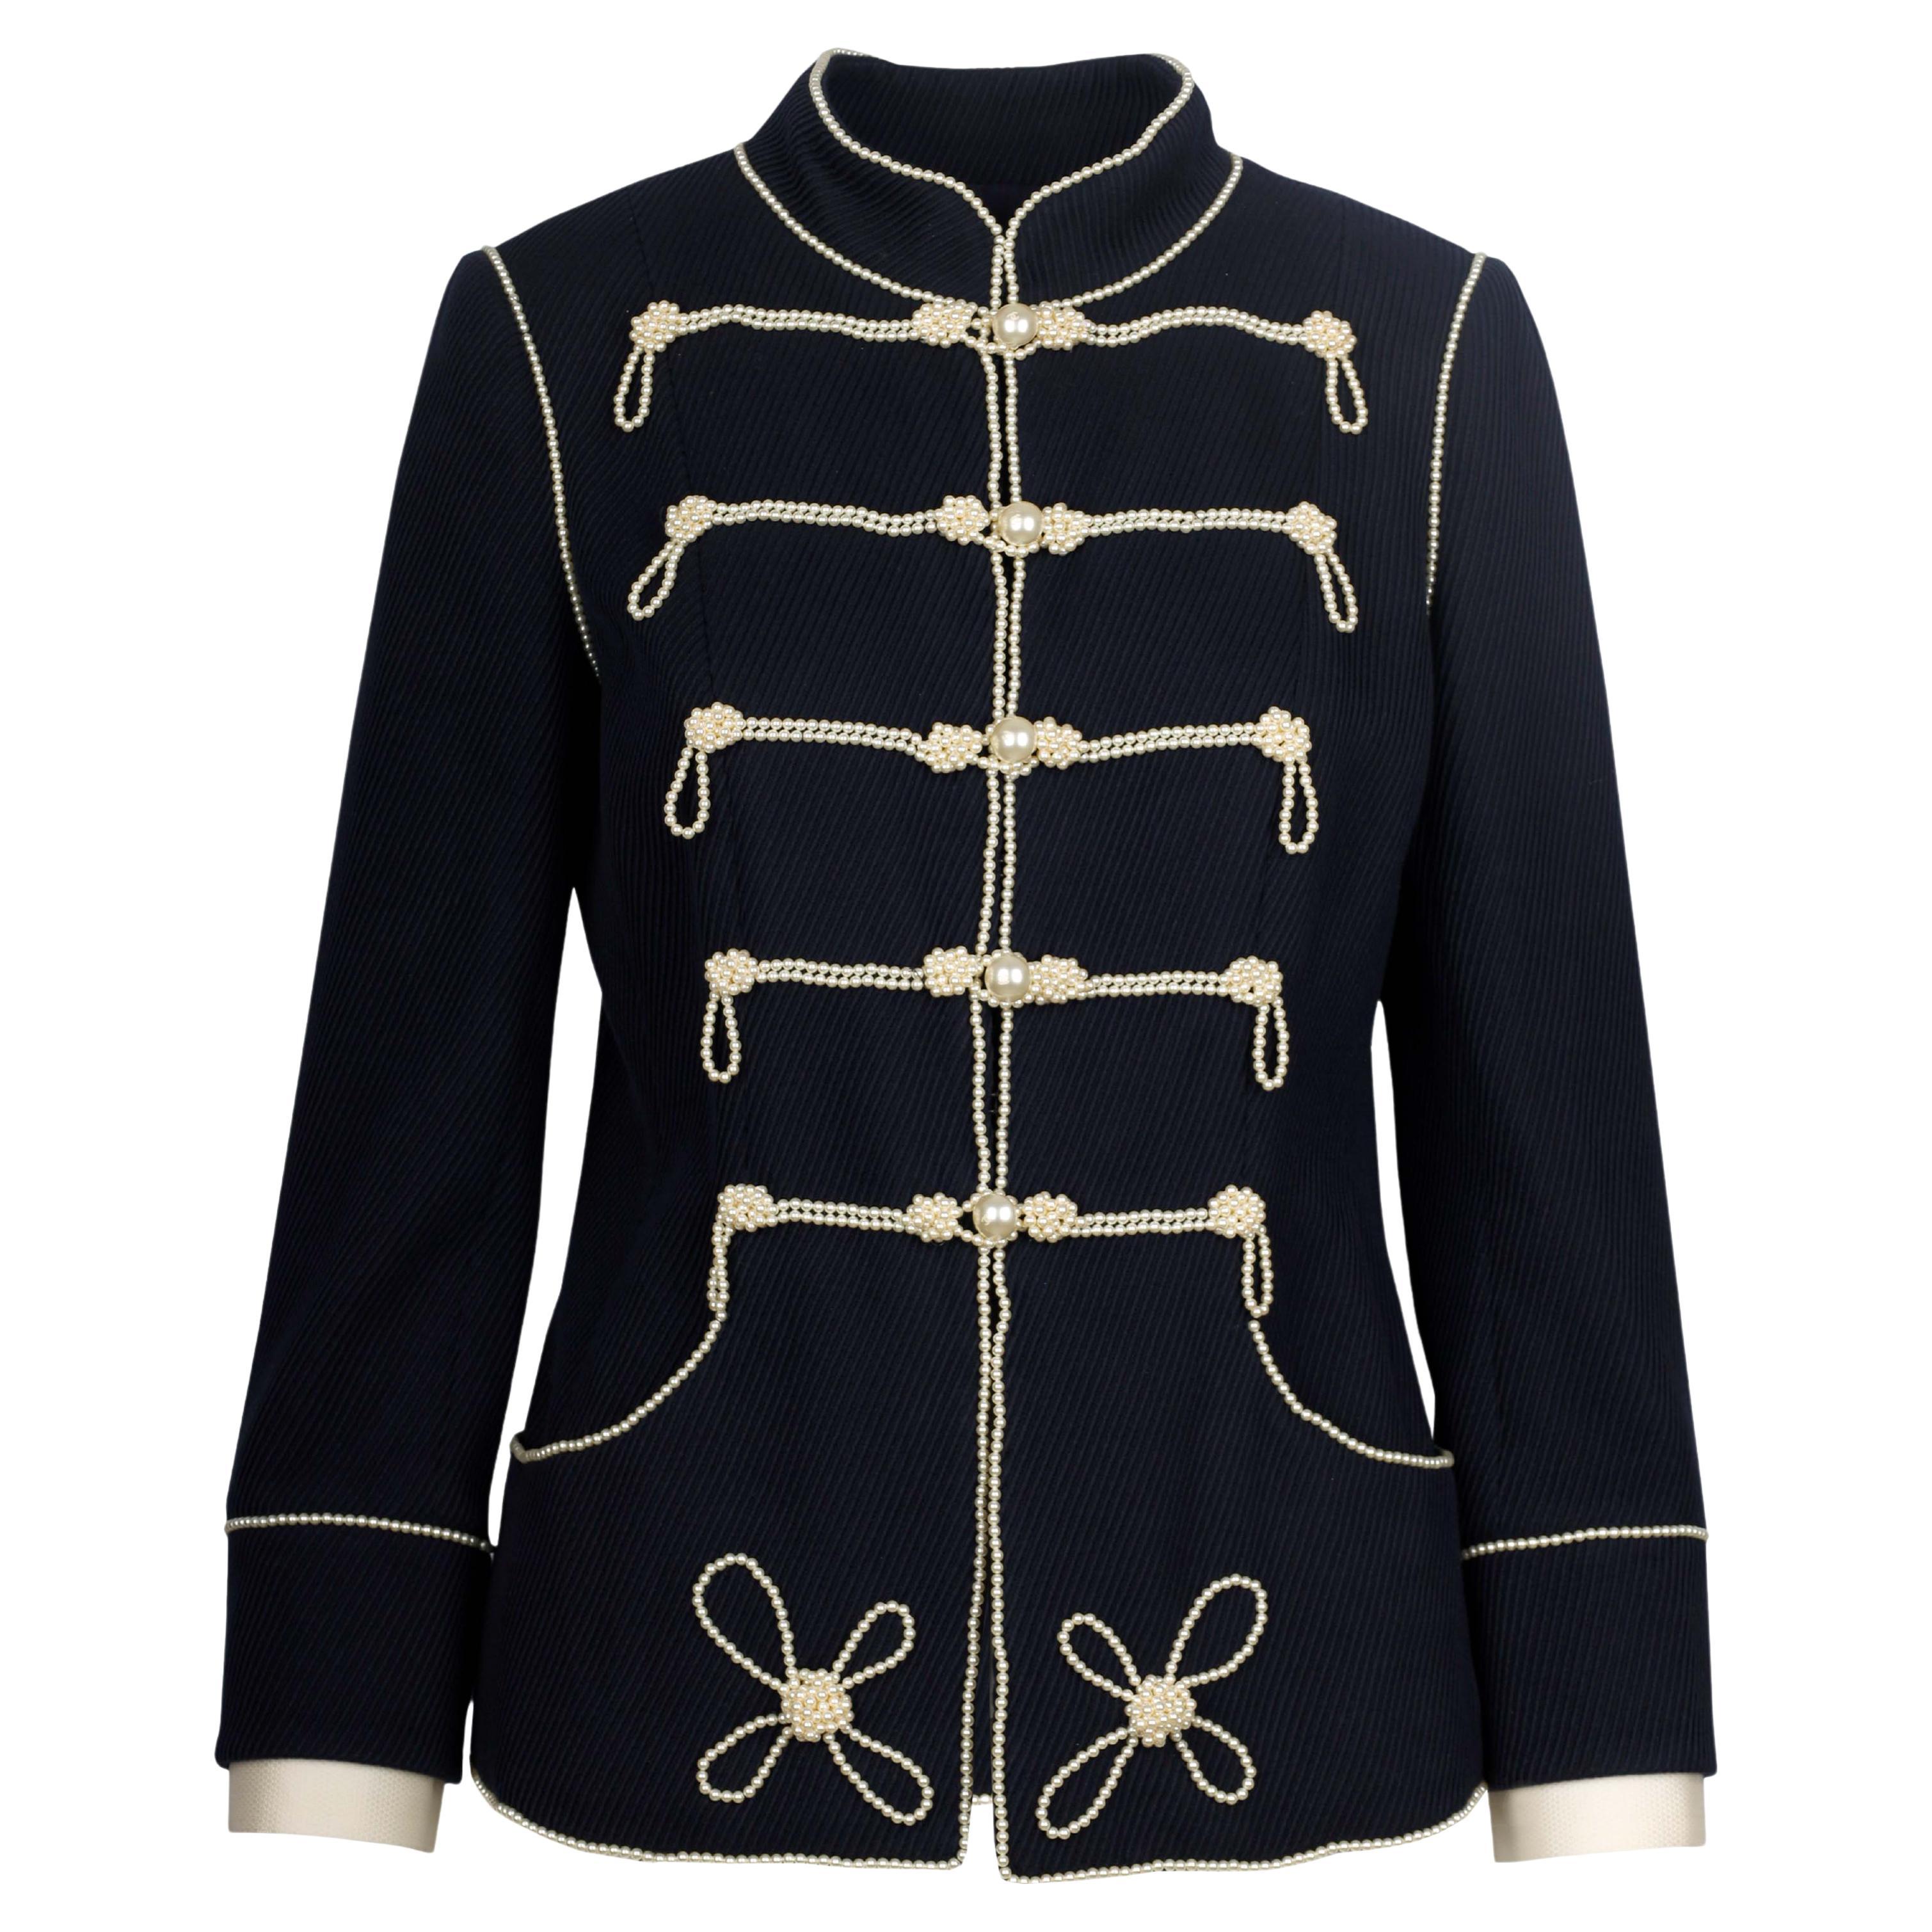 Chanel Navy Majorette Jacket with Pearls - '10s